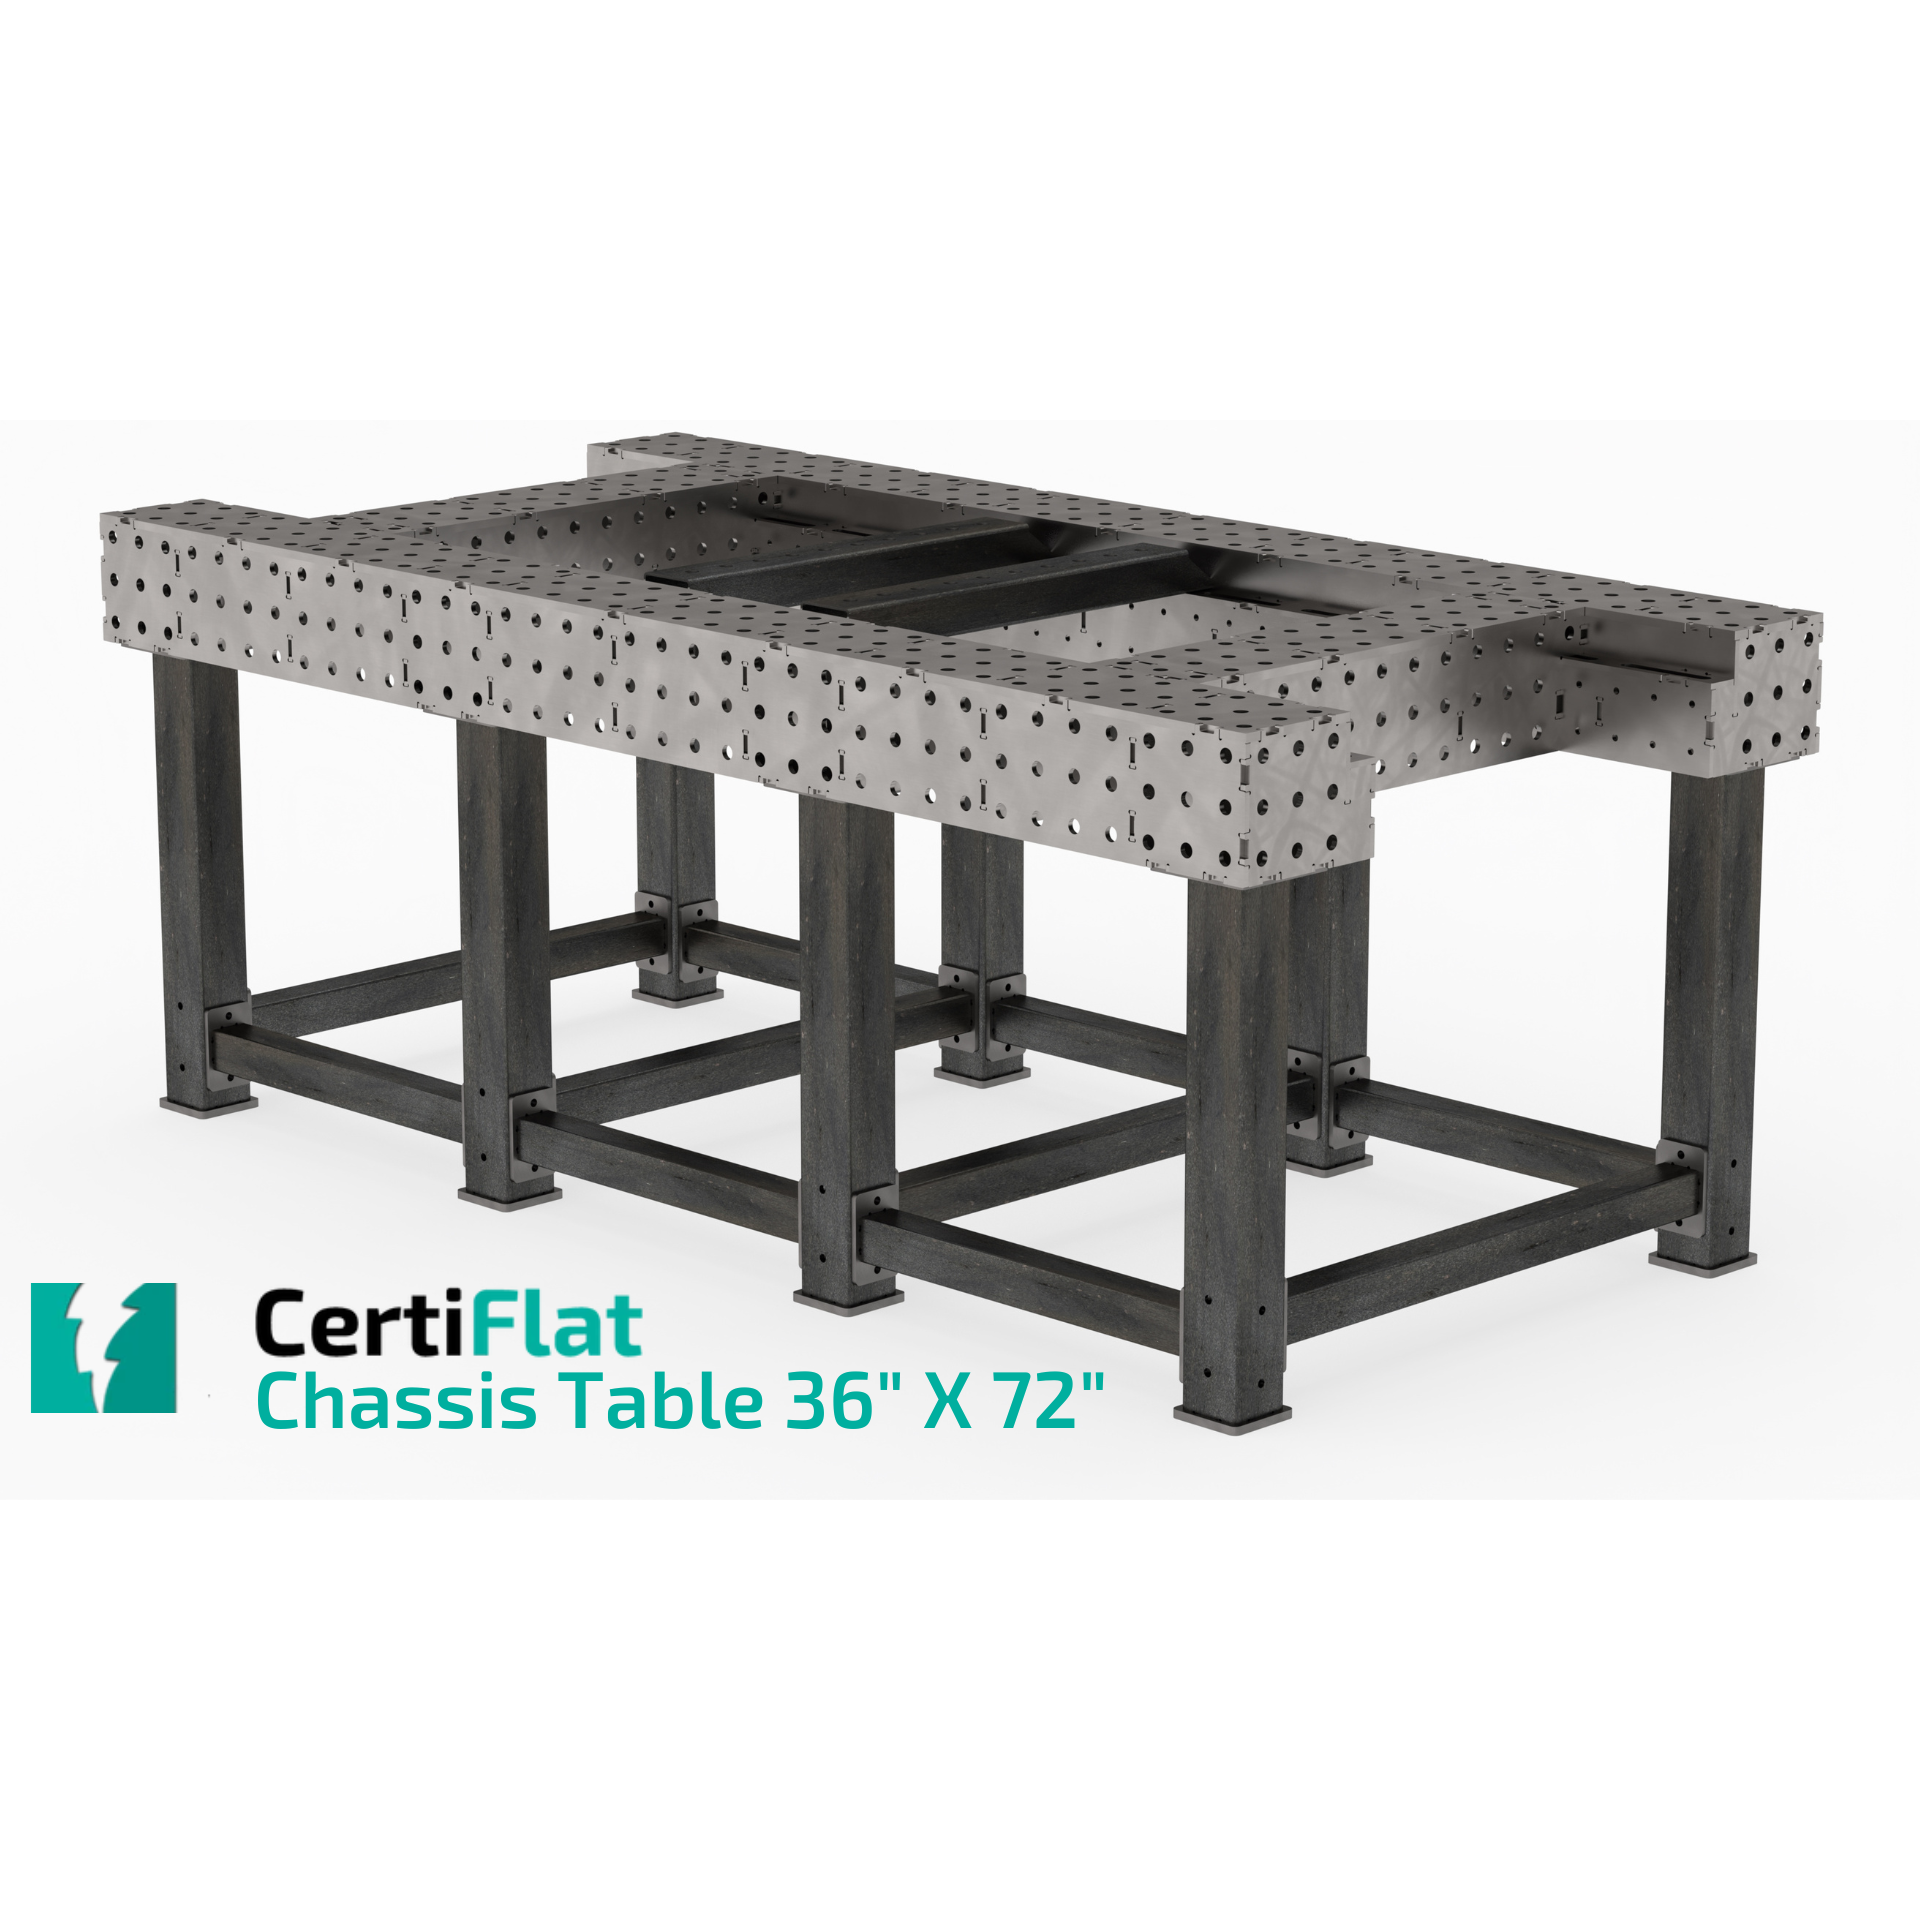 CertiFlat Chassis Table 36" X 72", Fabrication Table Heavy Duty